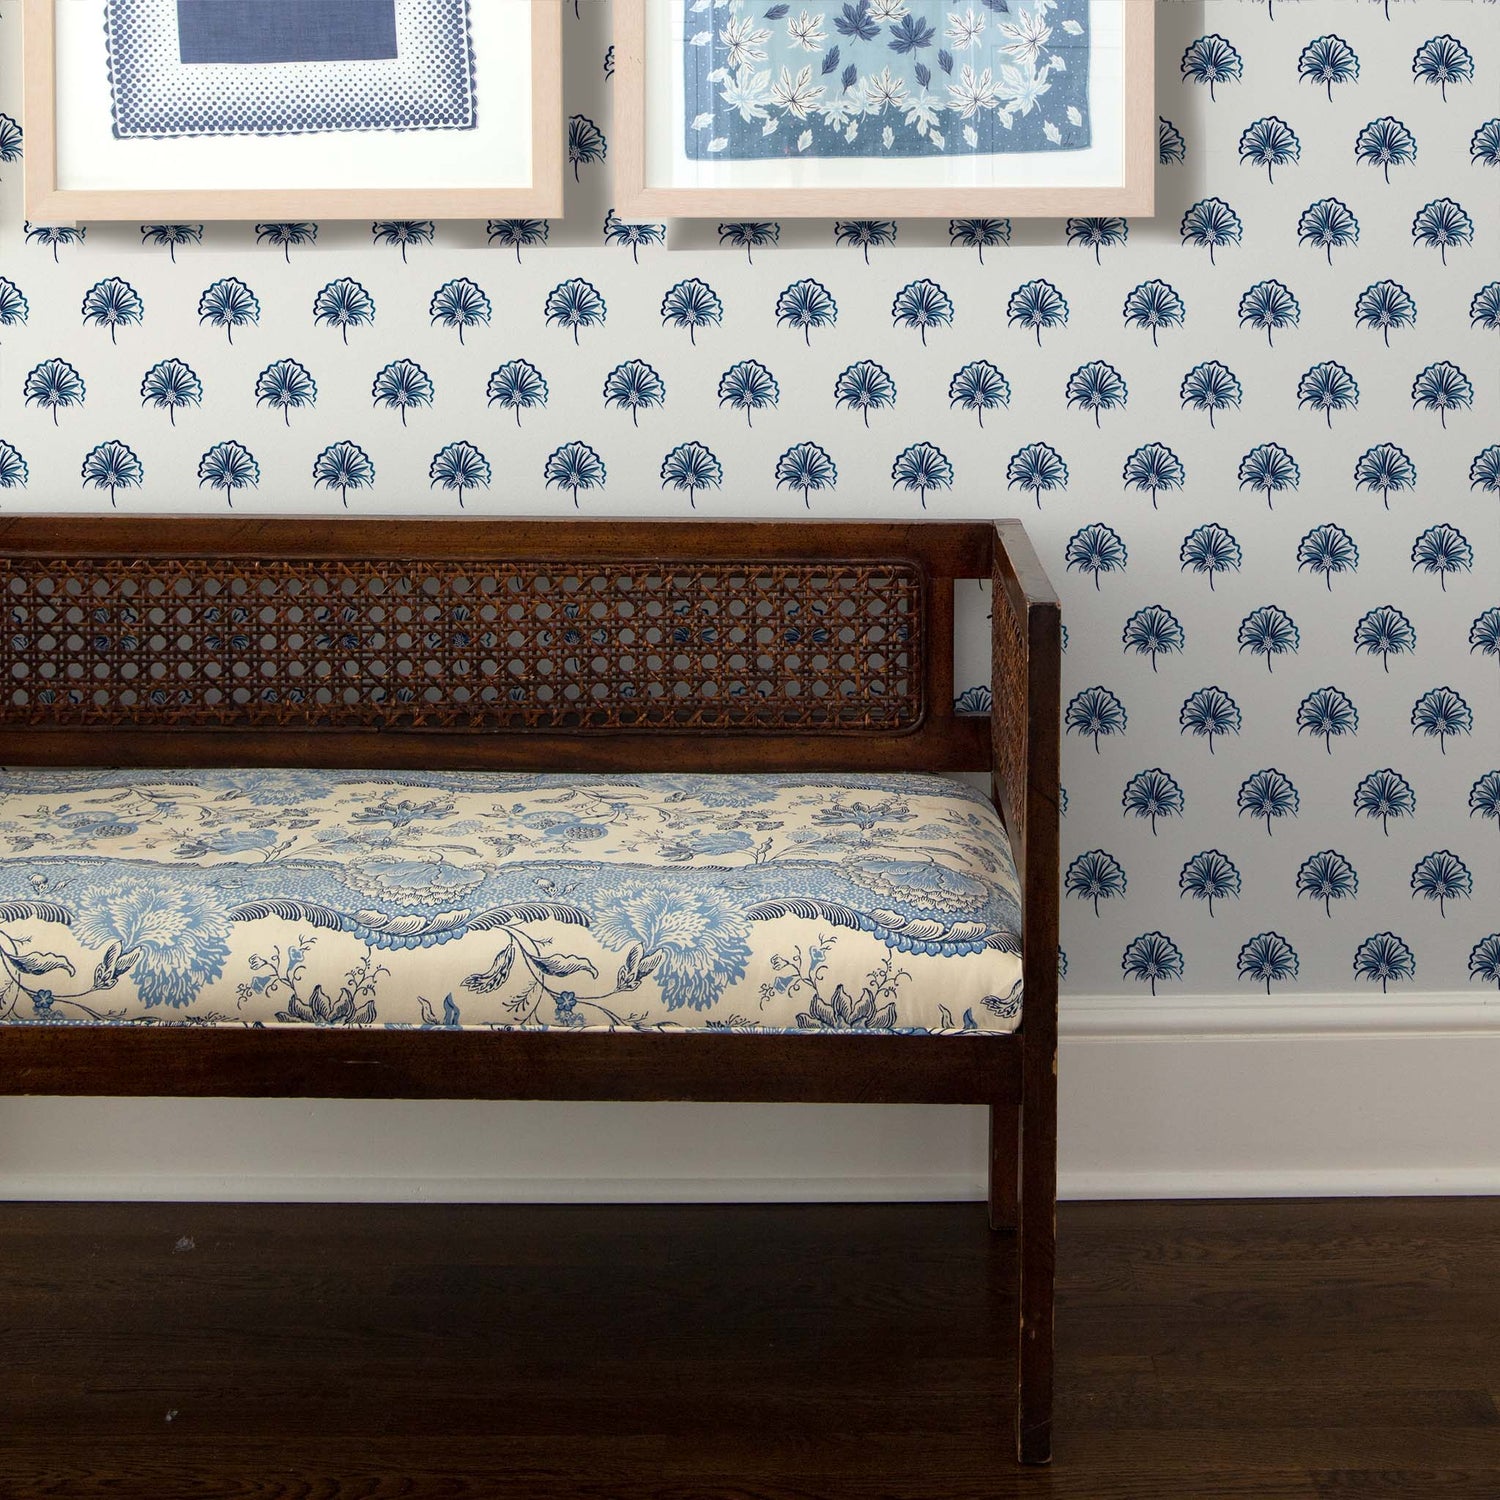 Wooden bench with floral creme printed mattress over Floral Navy Printed Wallpaper with two framed artwork hanging